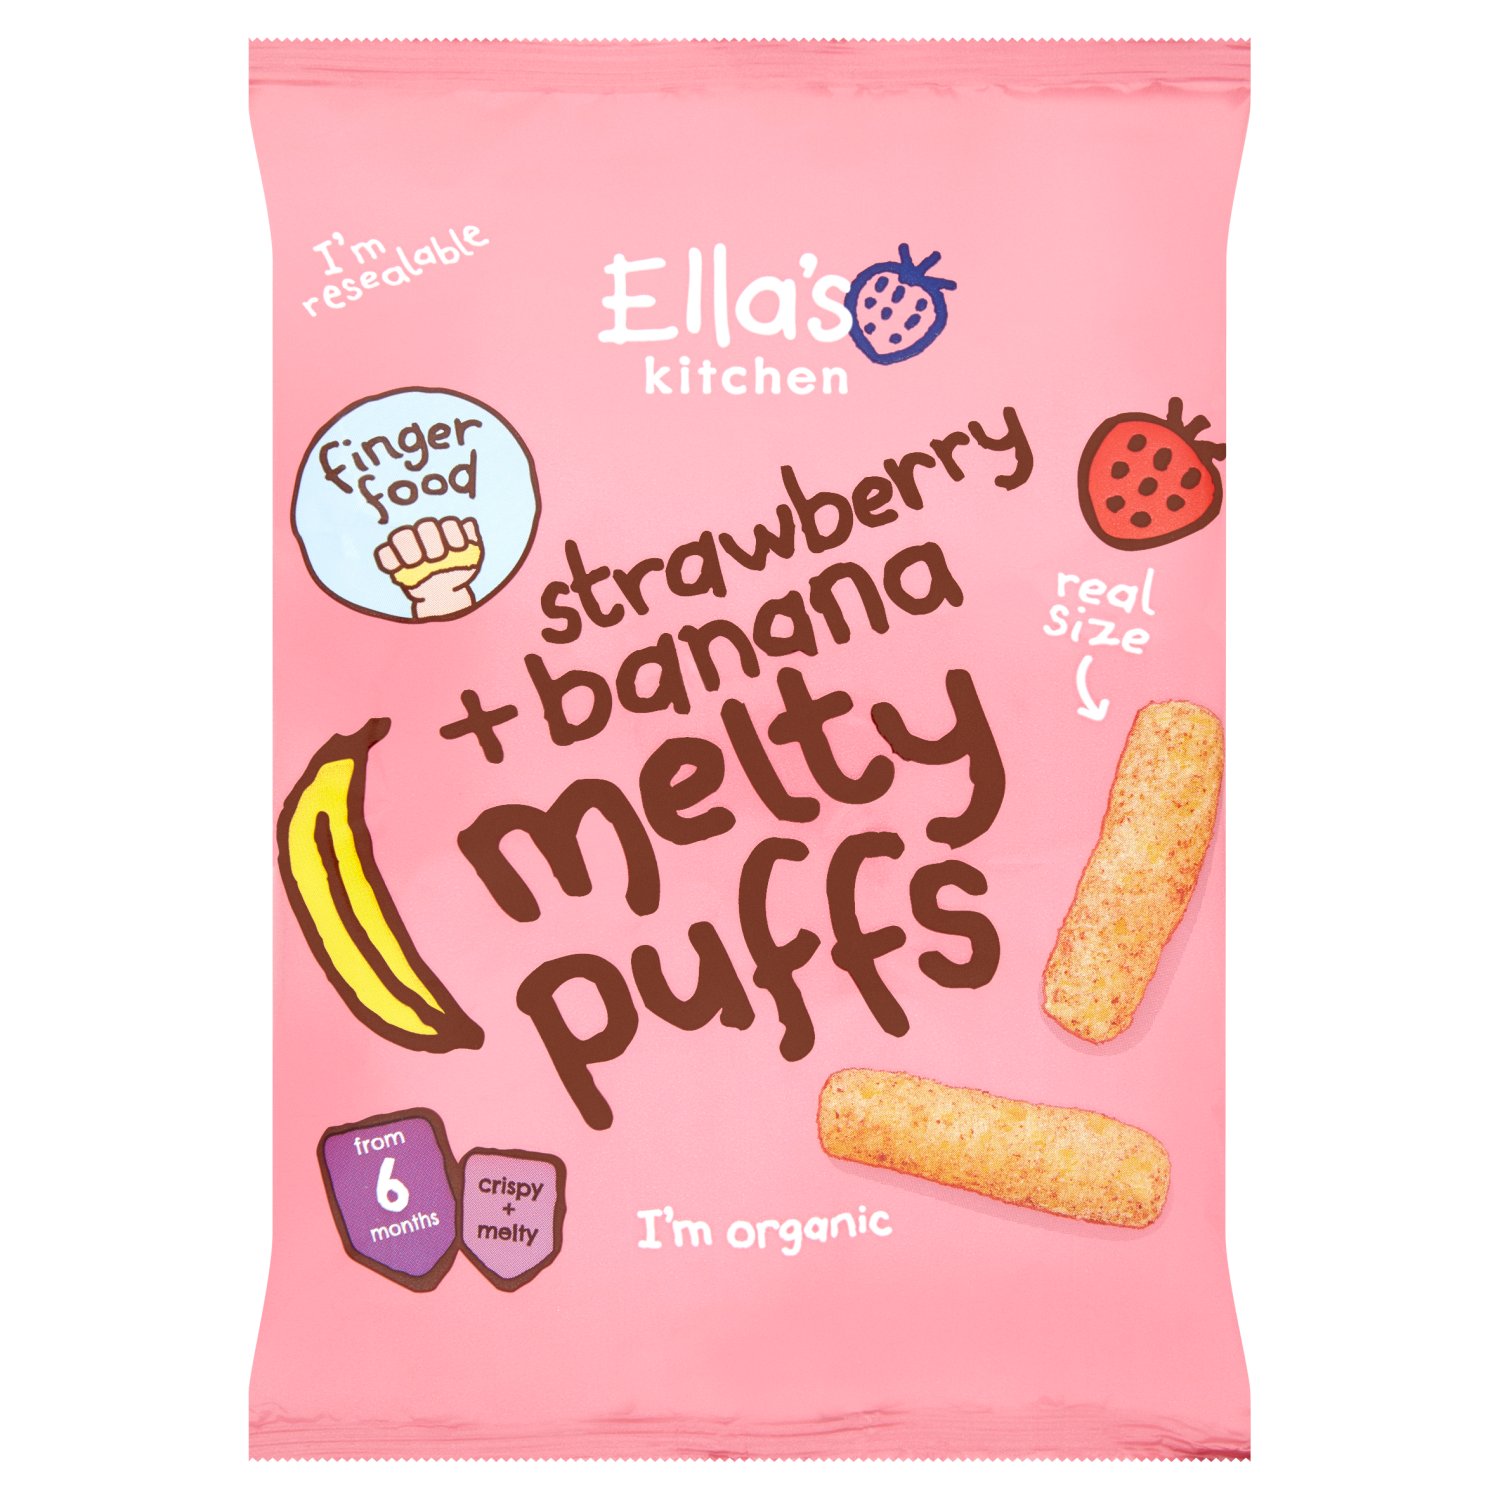 Hello, I'm organic Strawberry + Banana Maize Puffs. I'm a fun + tasty finger food made for playing and learning, with less mess.

Who am I made for? I'm made for babies from 6 months. I'm just the right shape + size to help little hands learn to pick up food on their own and I'm super melty to disappear in little mouths.

- Just yummy organic finger food for babies
- Crispy + Melty texture perfect for little ones from 6 + months
- No added salt or sugar - I contain naturally occuring sugars
- No additives or colourings